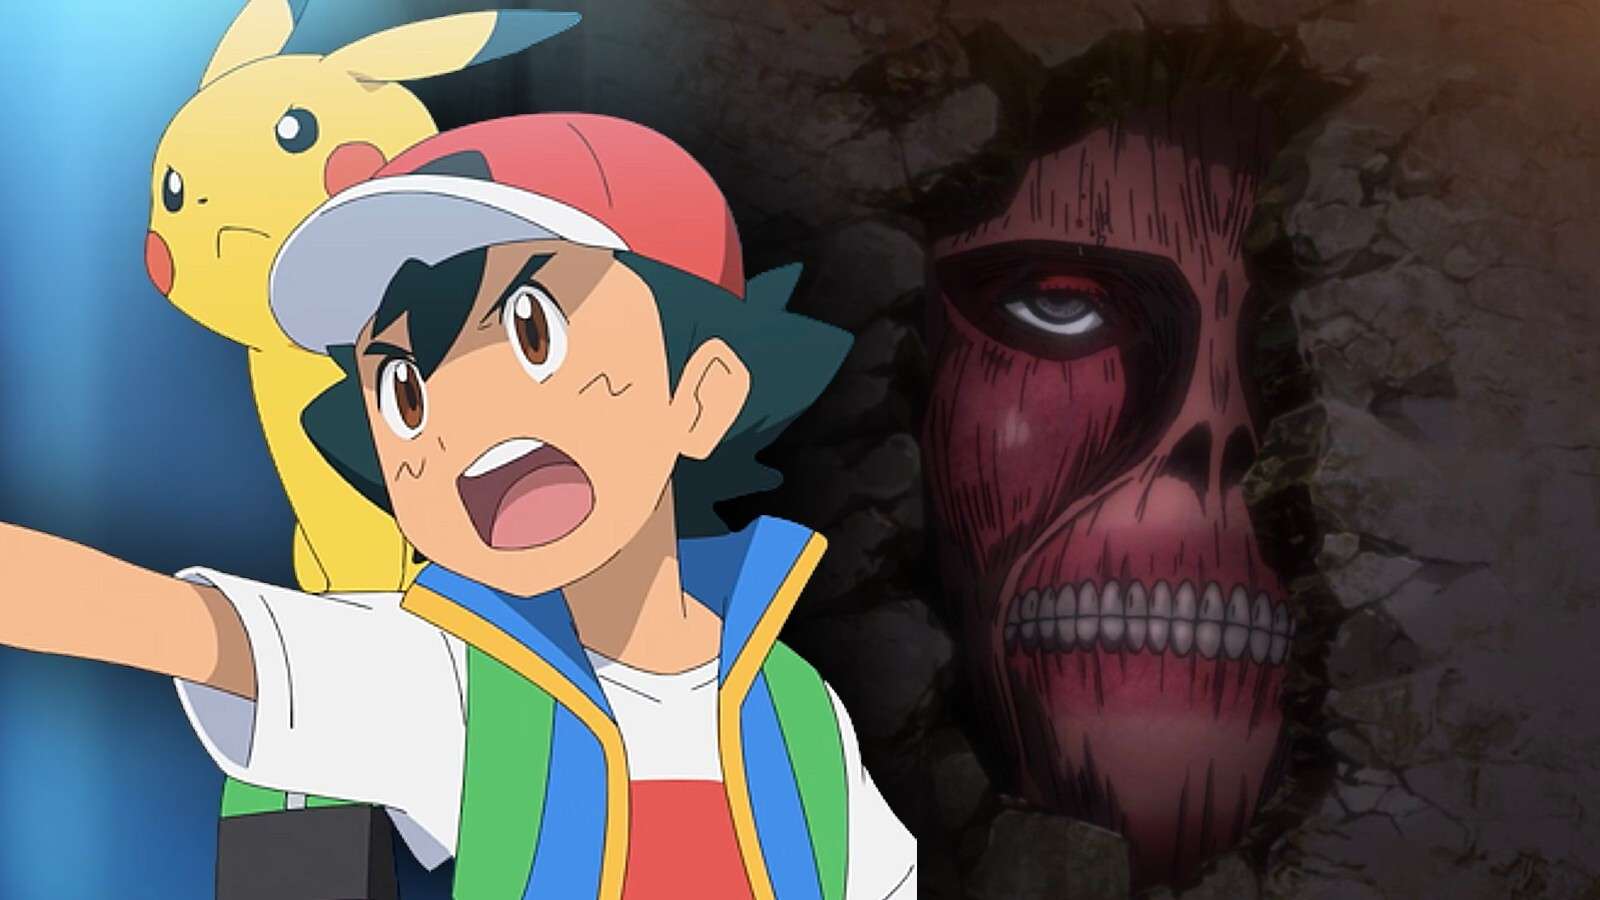 Ash and Pikachu from Pokemon and a Titan from Attack on Titan